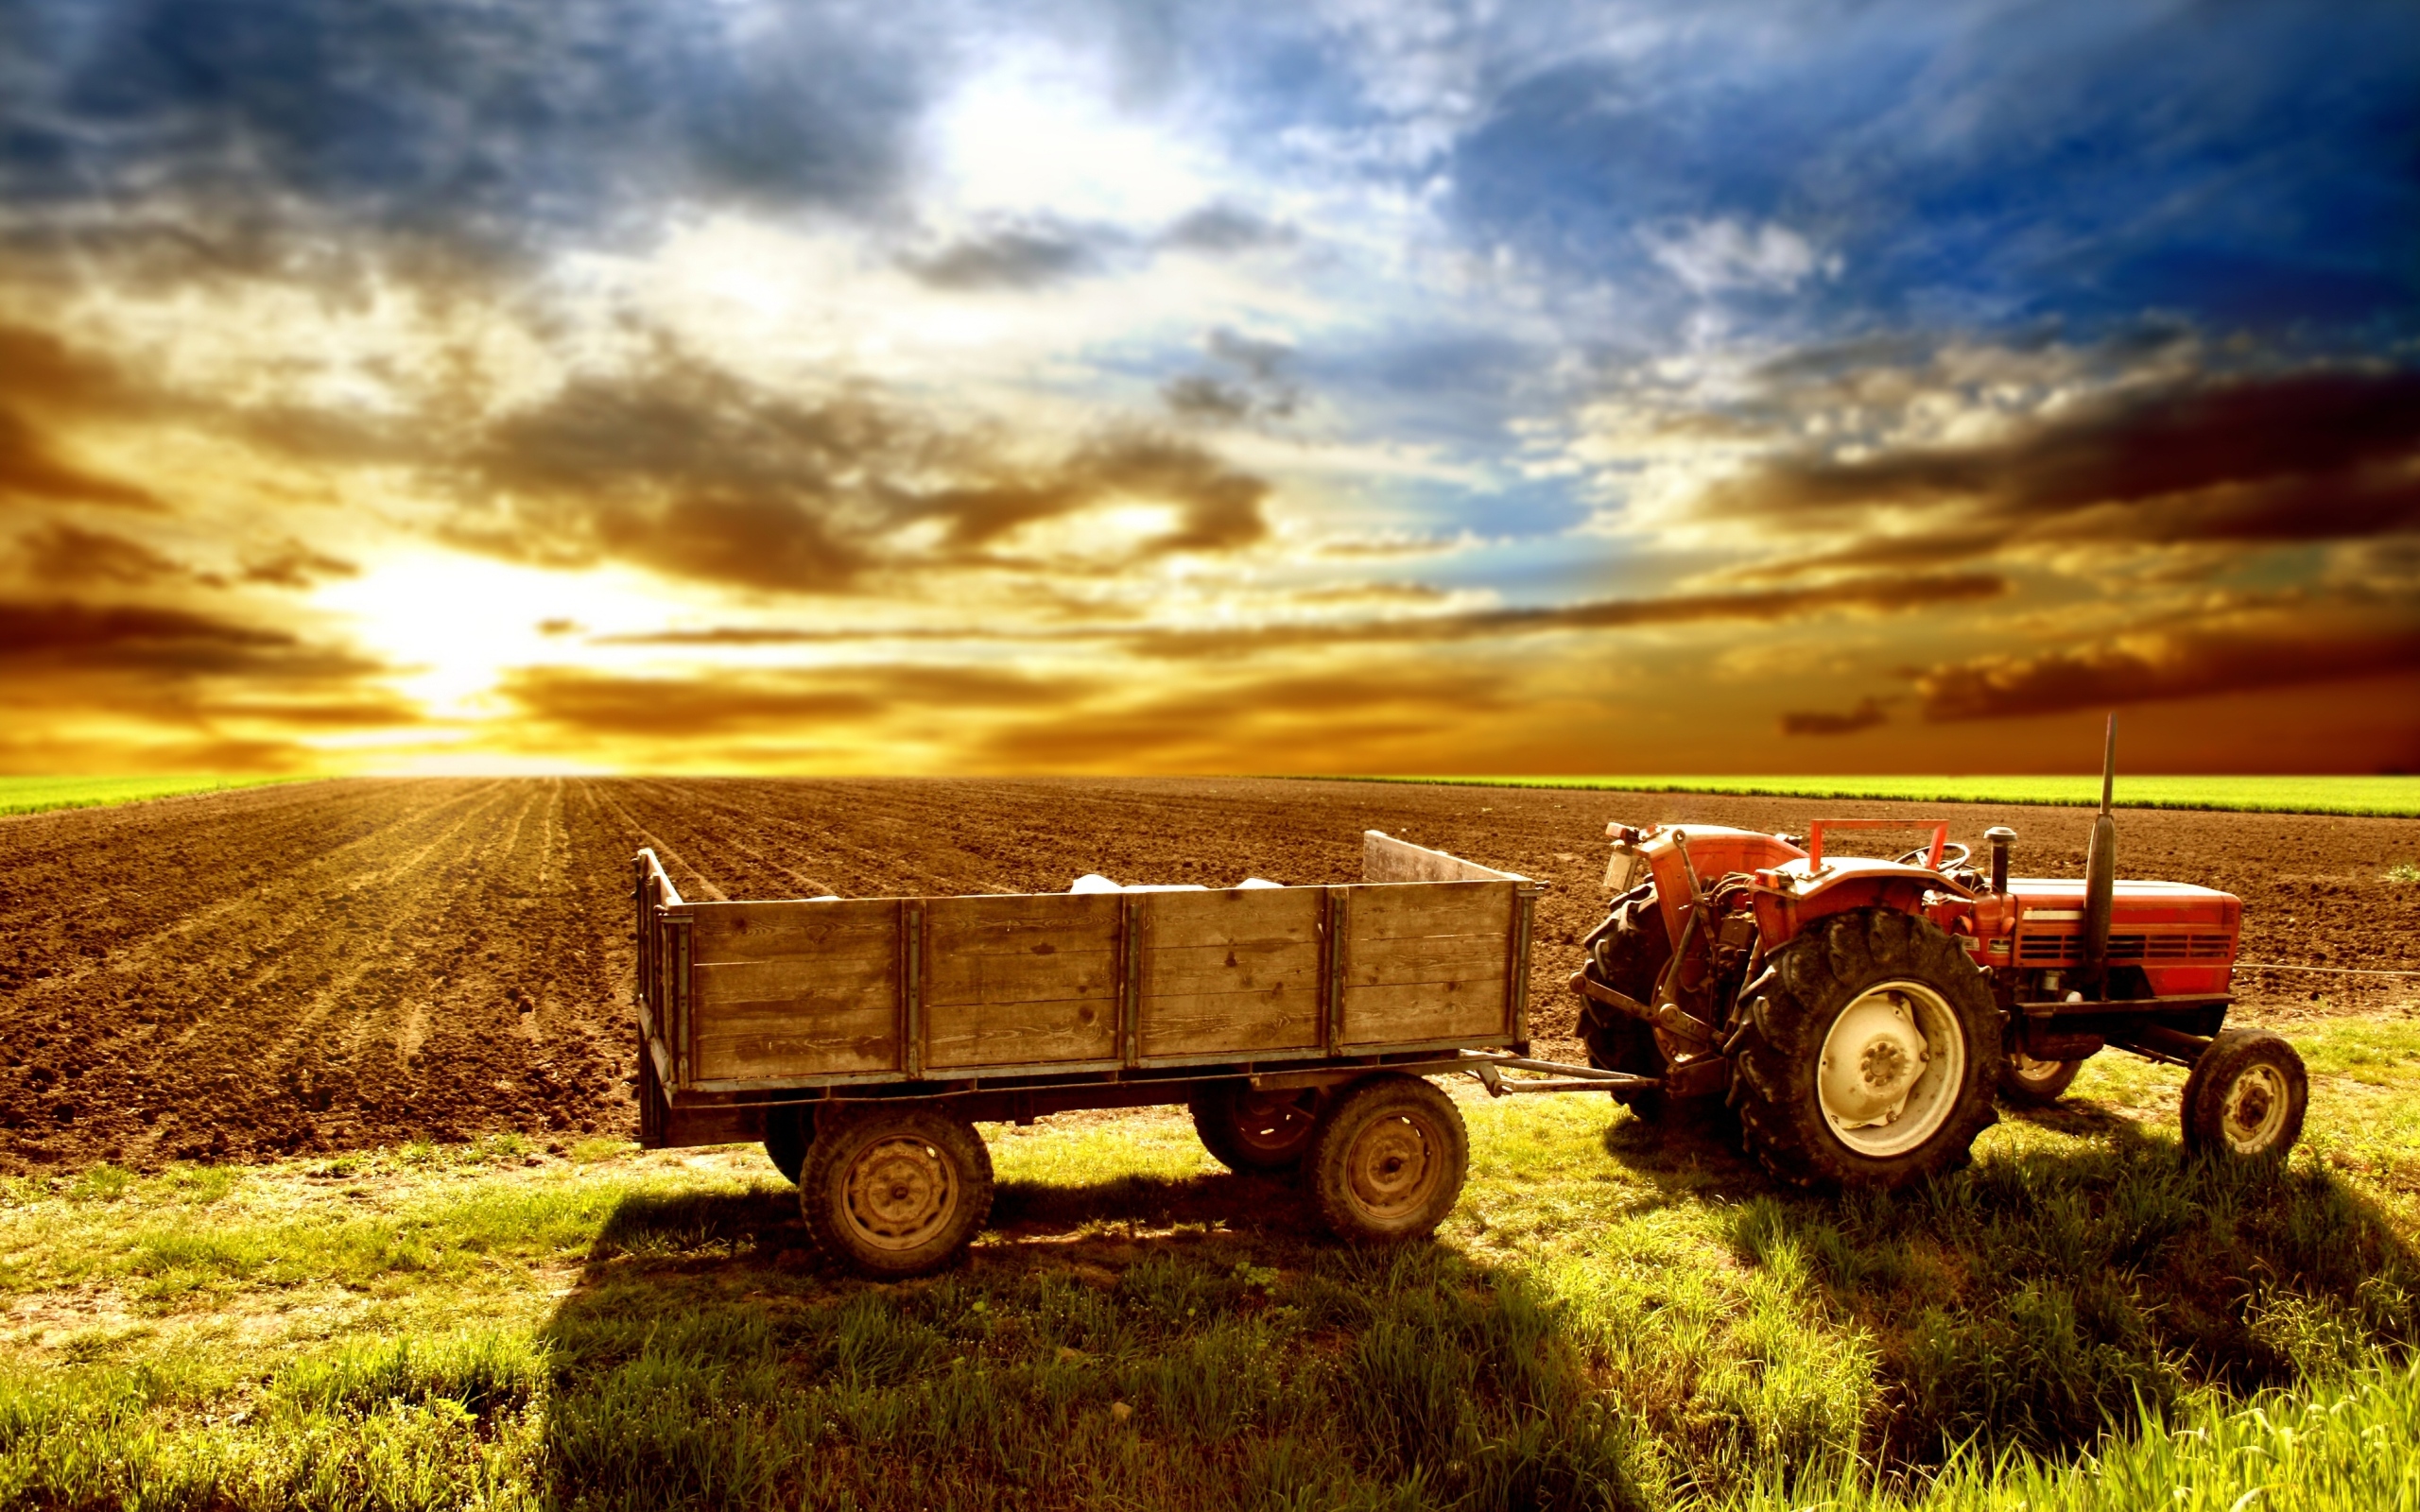 Tractor Wallpaper For Puter On